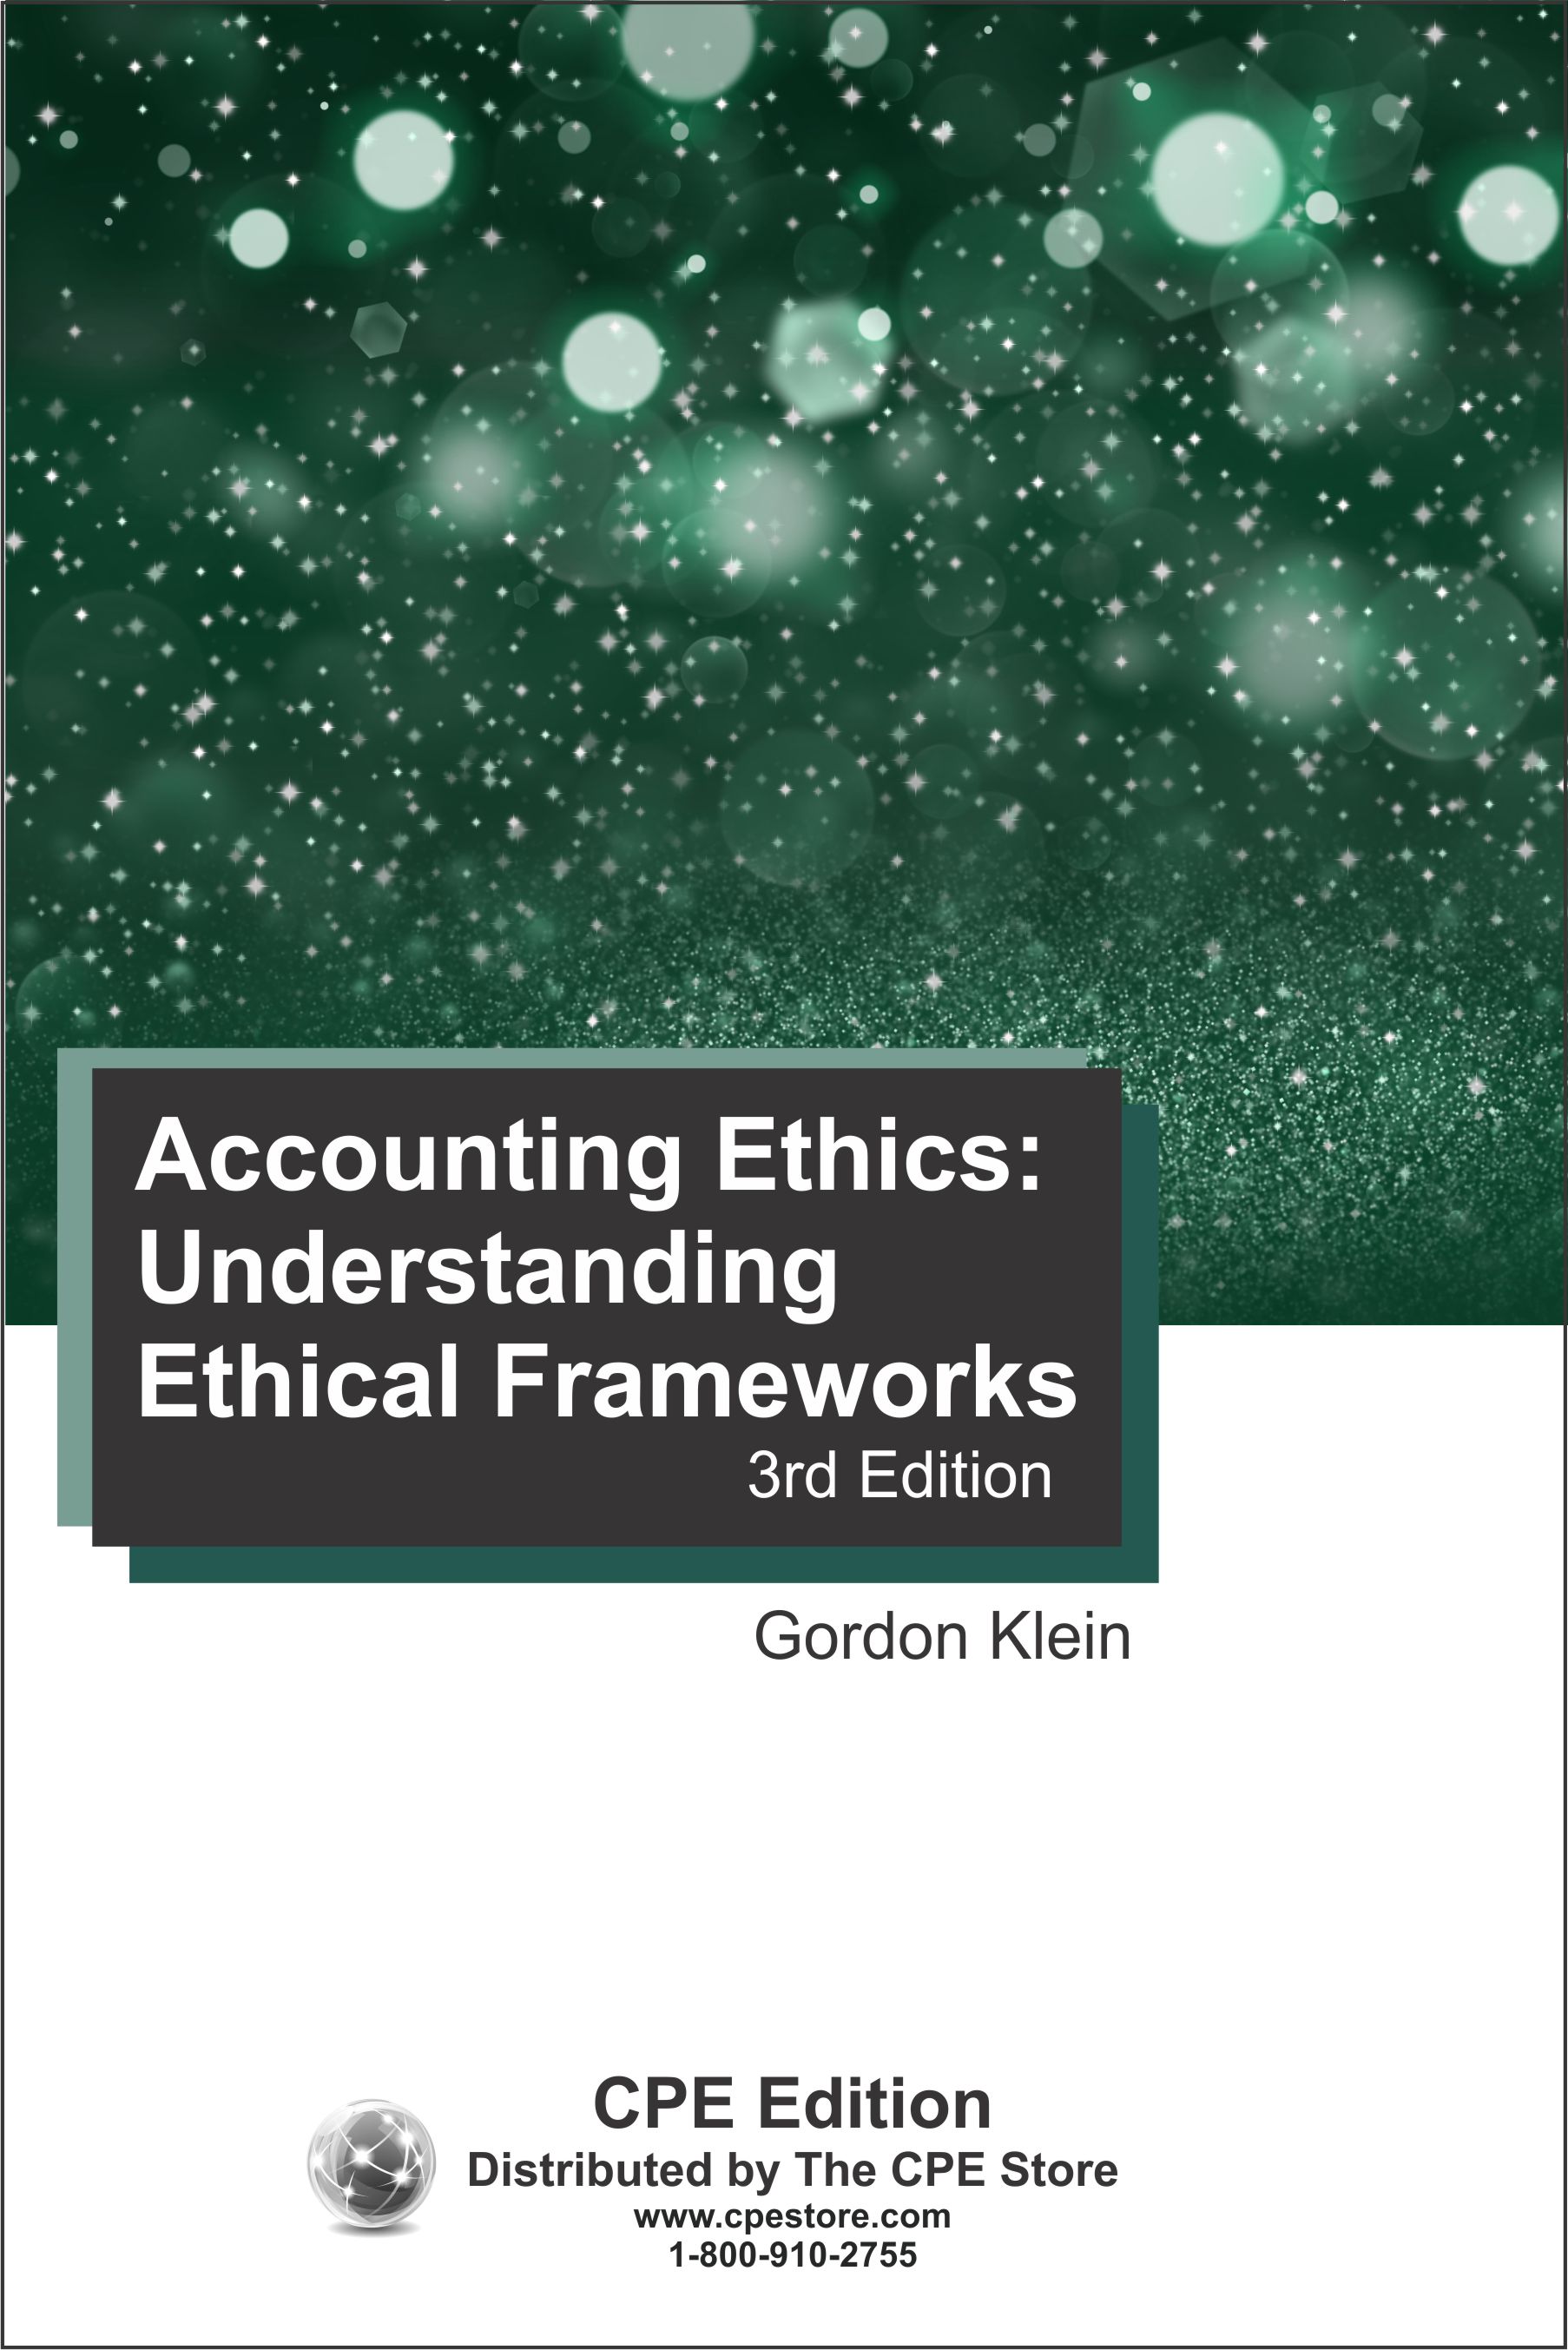 Accounting Ethics: Understanding Ethical Frameworks